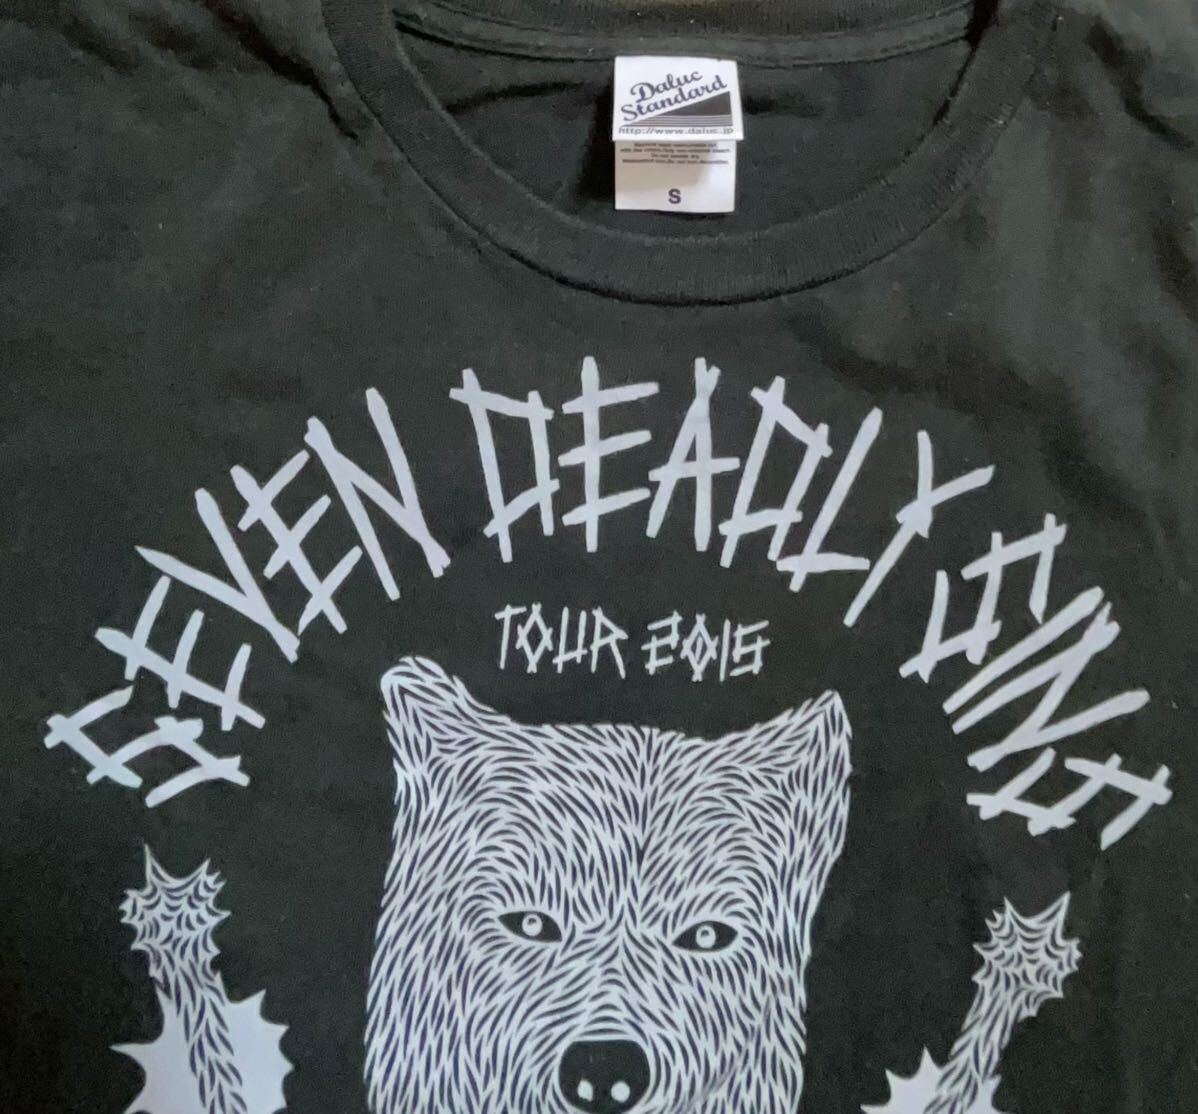 MAN WITH A MISSION TOUR 2015 Tシャツ S BLK ７つの対バン